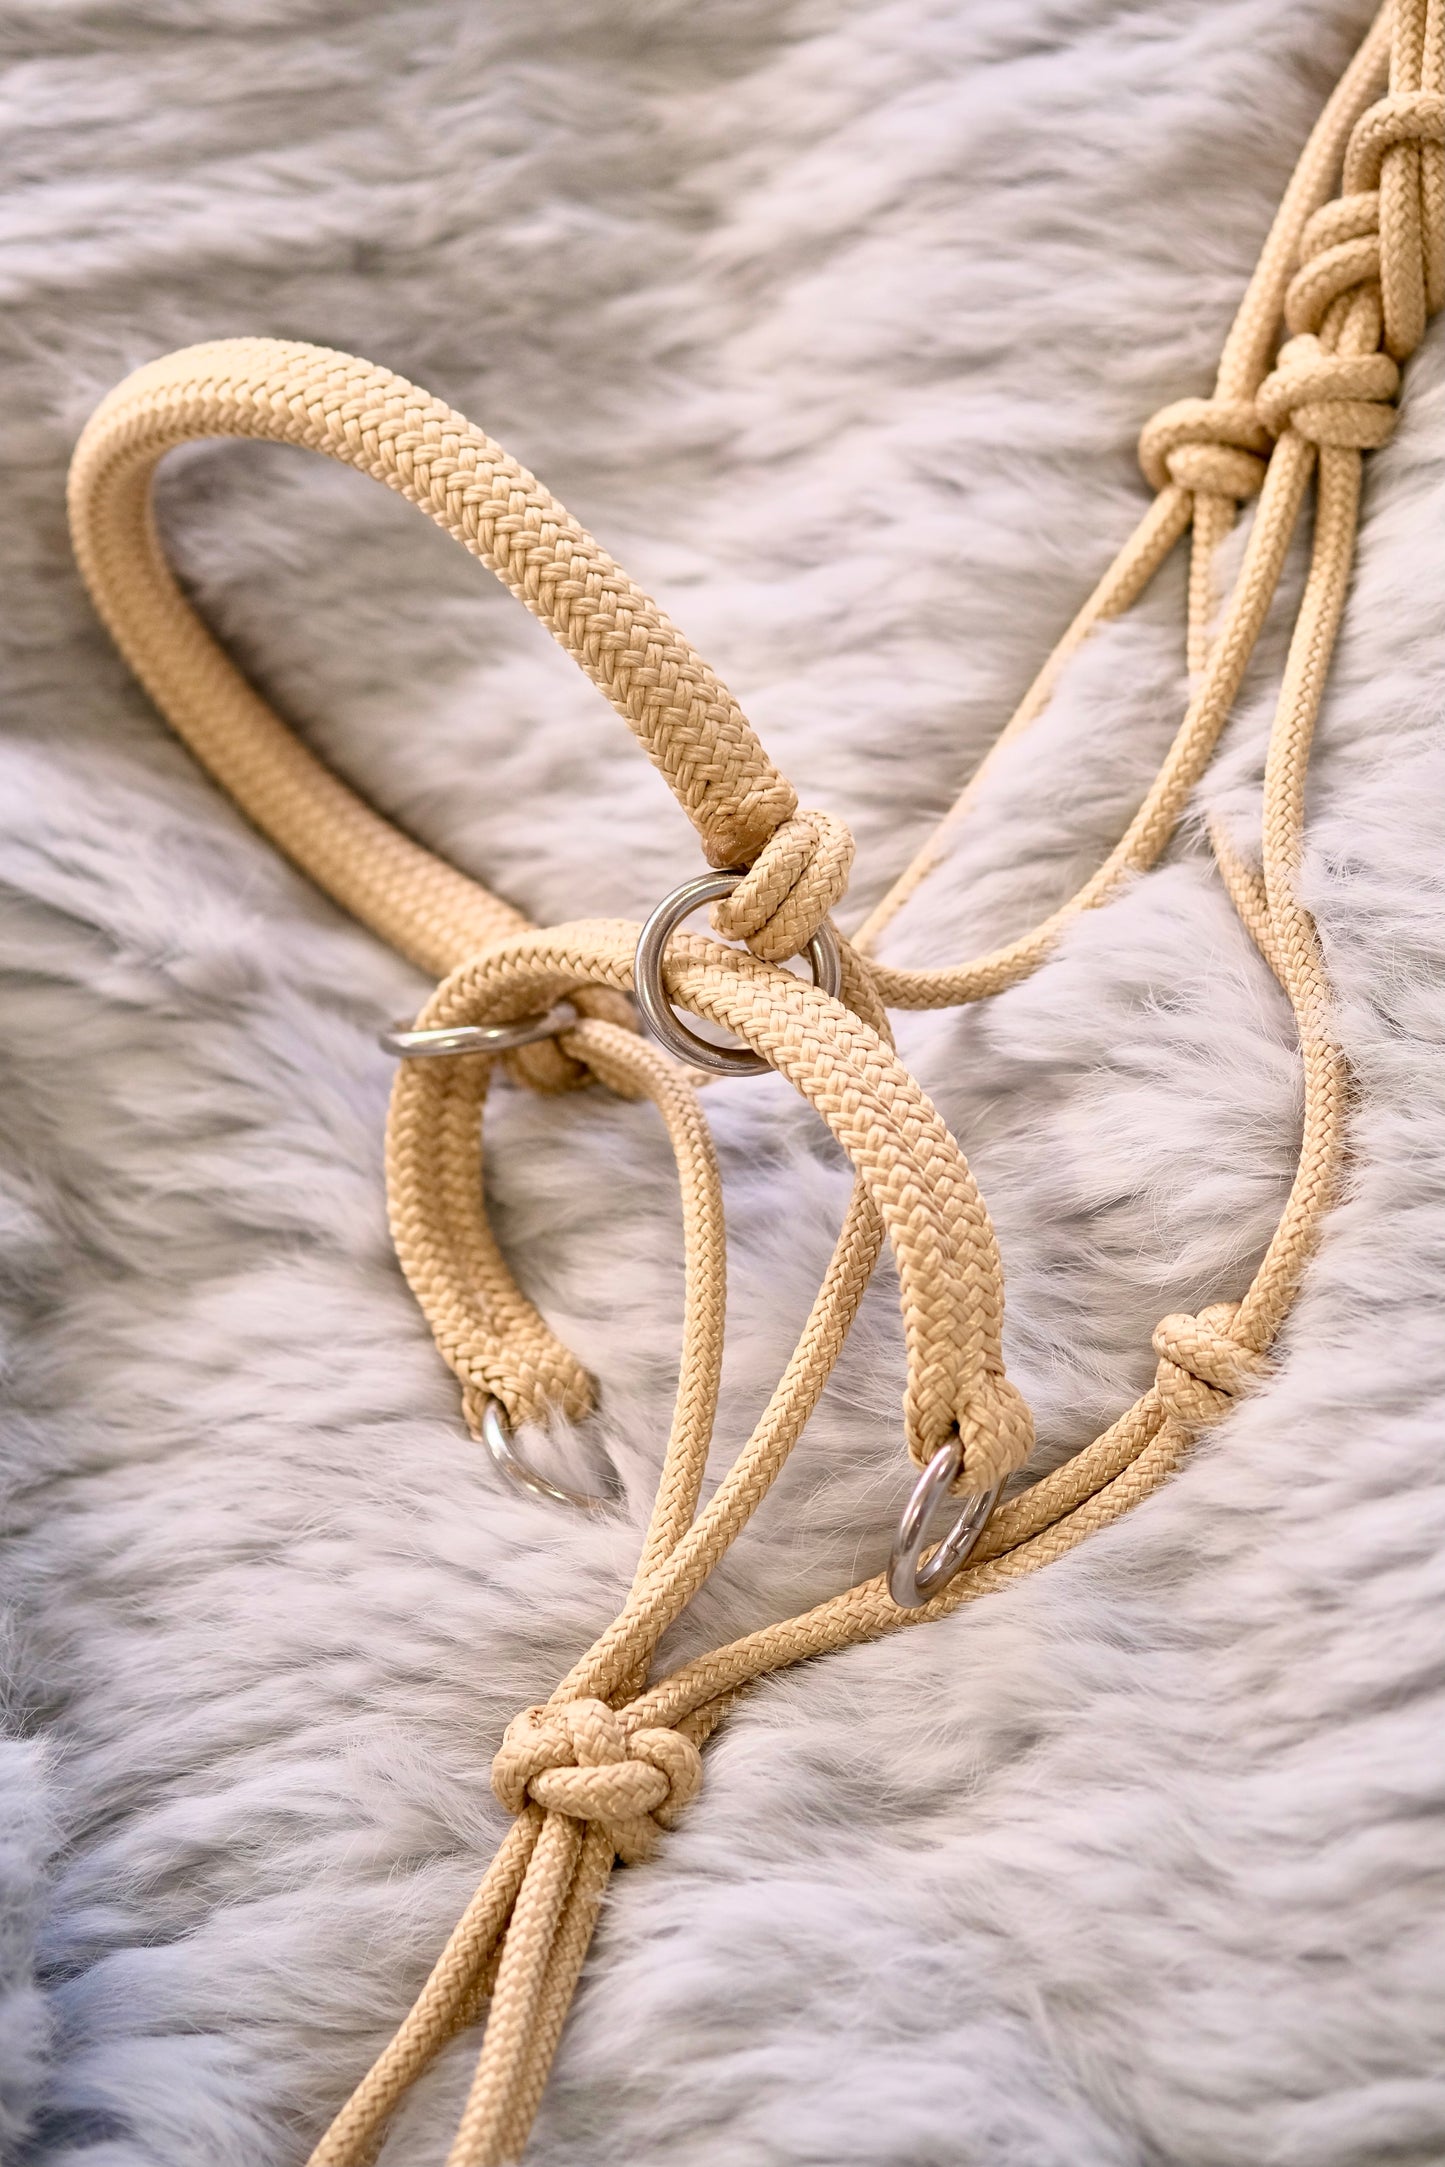 Justin Bitless Riding Rope Halter - with overlay